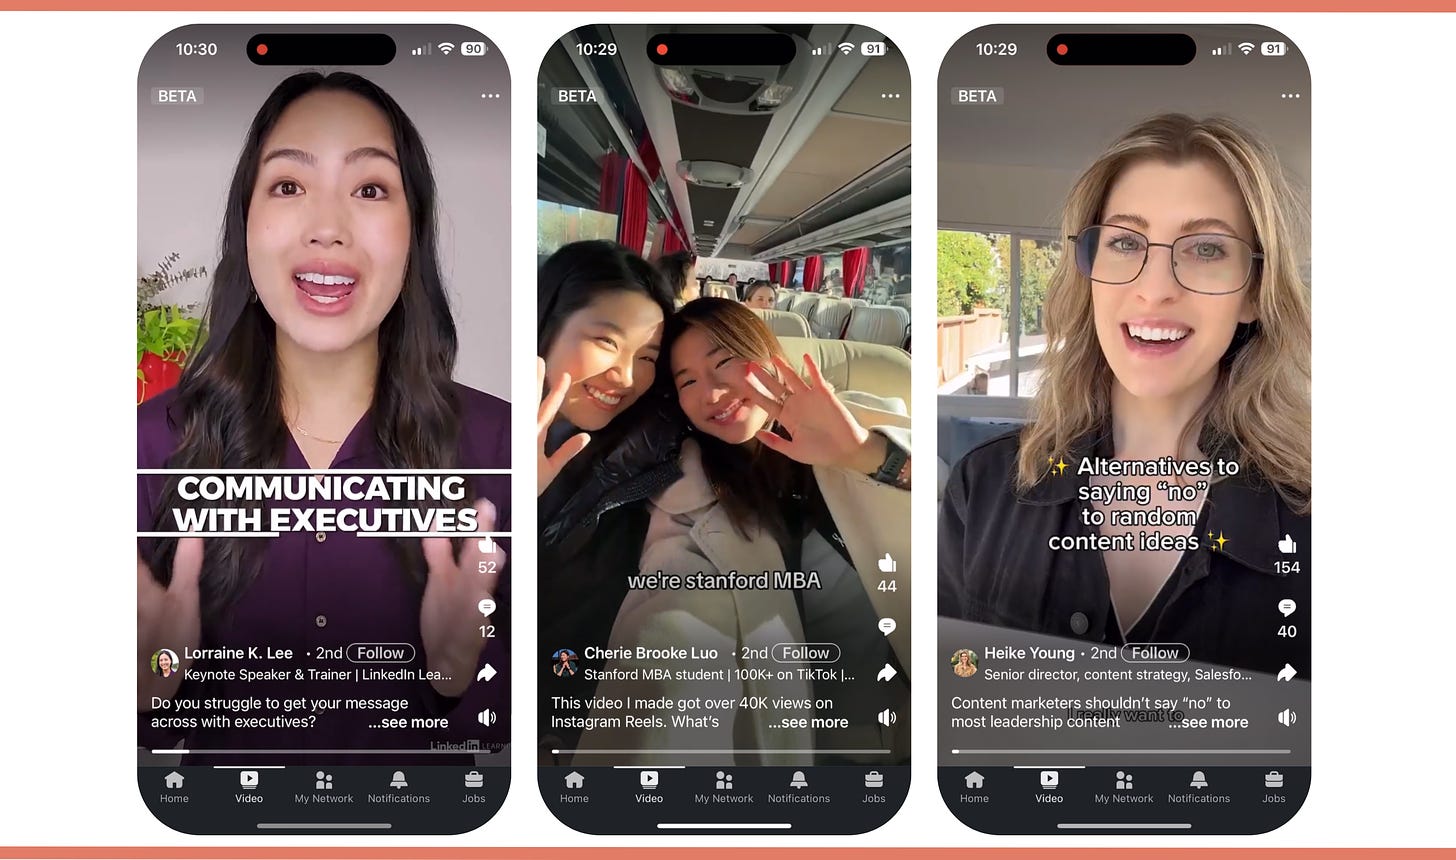 Image of 3 vertical video screenshots taken from LinkedIn’s new video feed. They look like TikTok videos. From left to right are Lorraine K. Lee, Cherie Brooke Luo and Heike Young